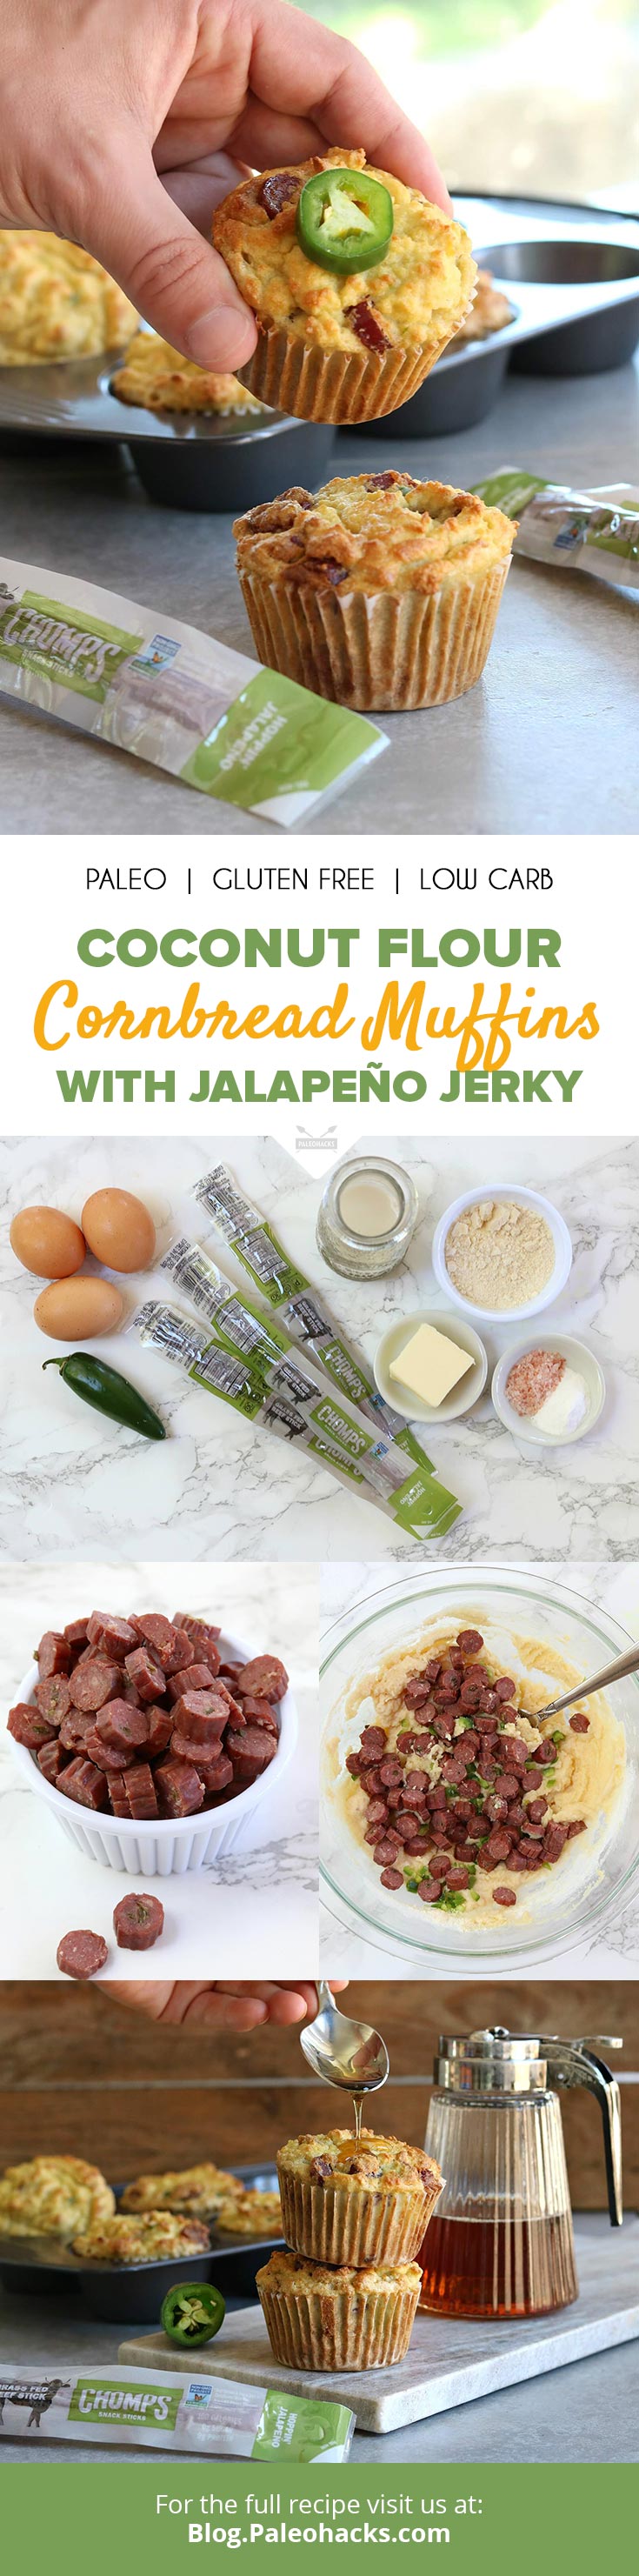 You’ve never had cornbread like this before. Paleo-friendly cornbread muffins with bites of savory beef jerky make for the perfect sweet and savory snack.